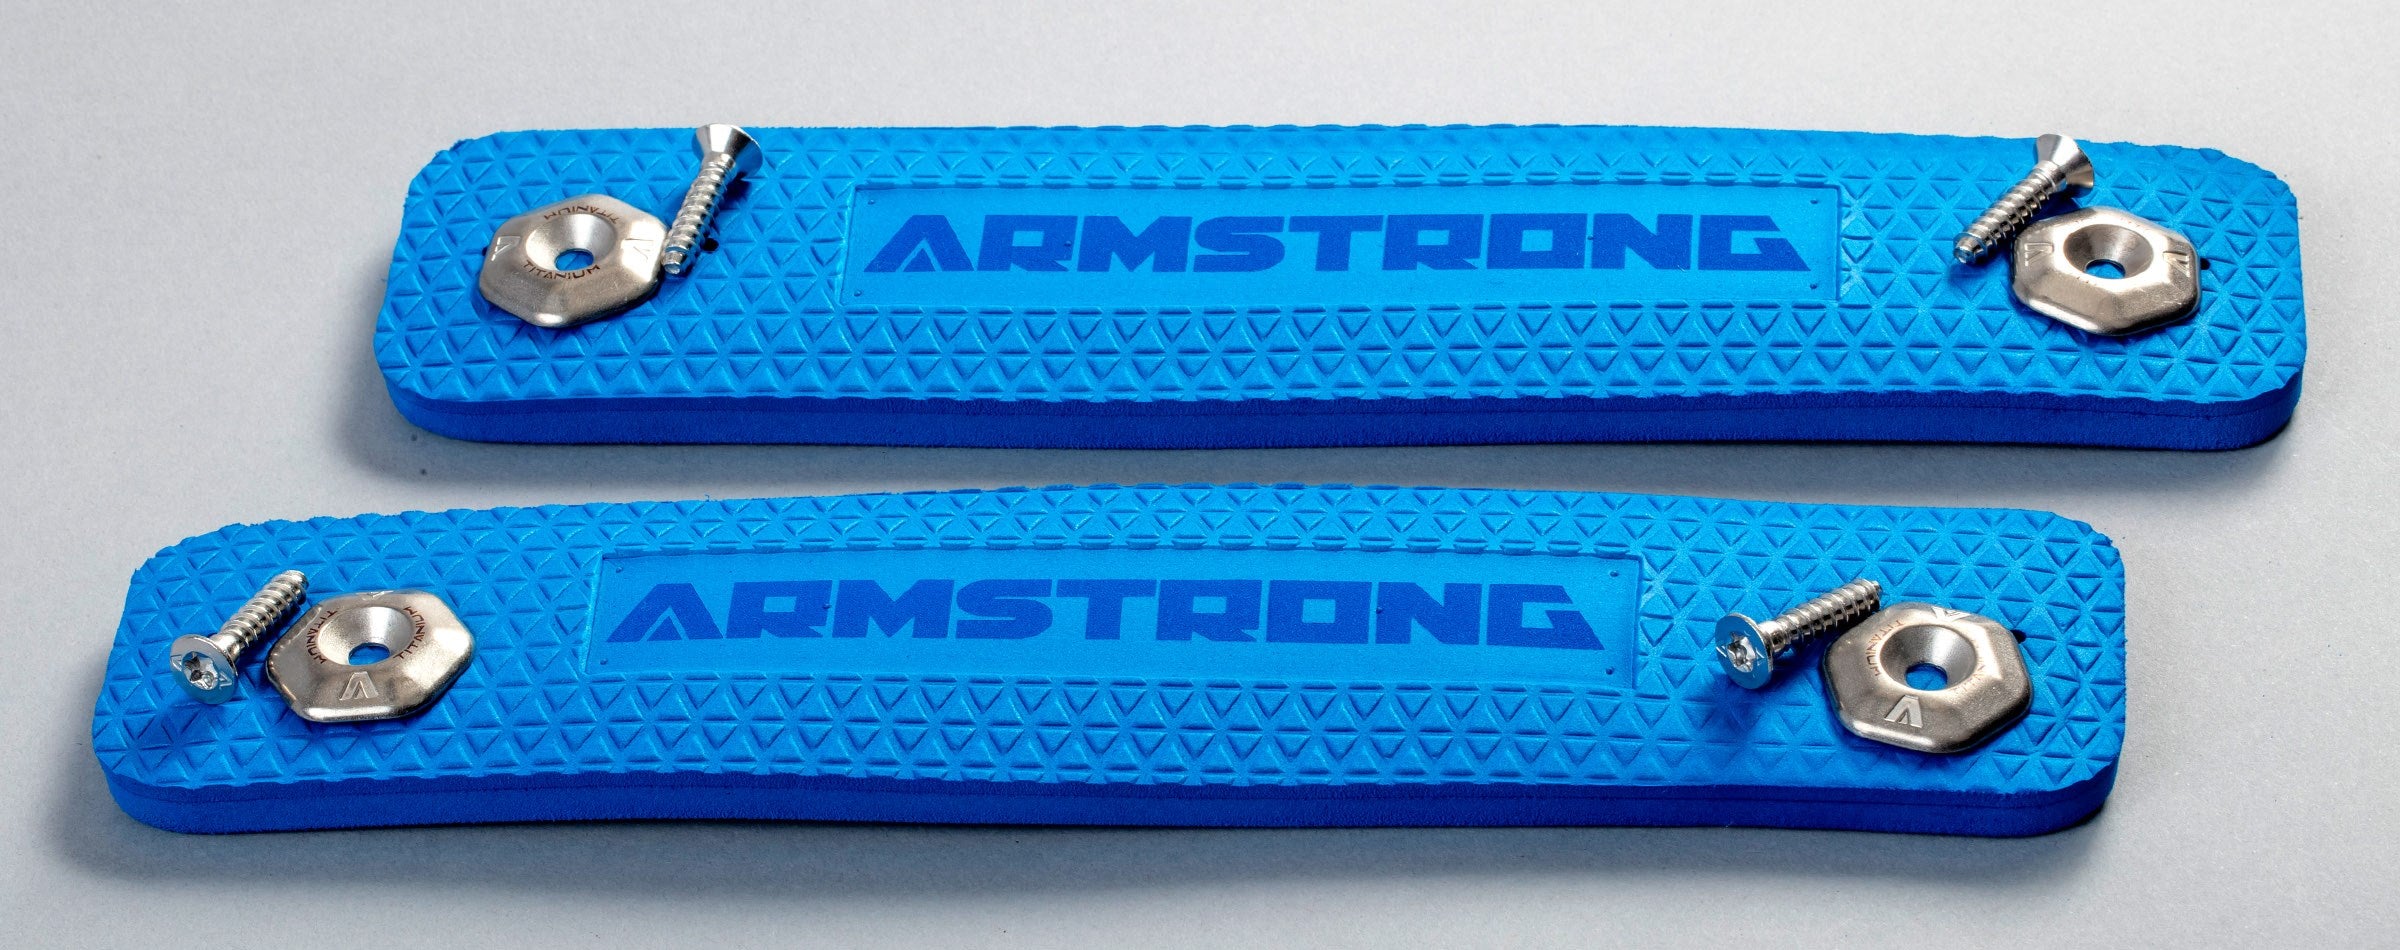 Armstrong Foot Straps - FG Board Straight Foot Strap - SWELL Wakesurf